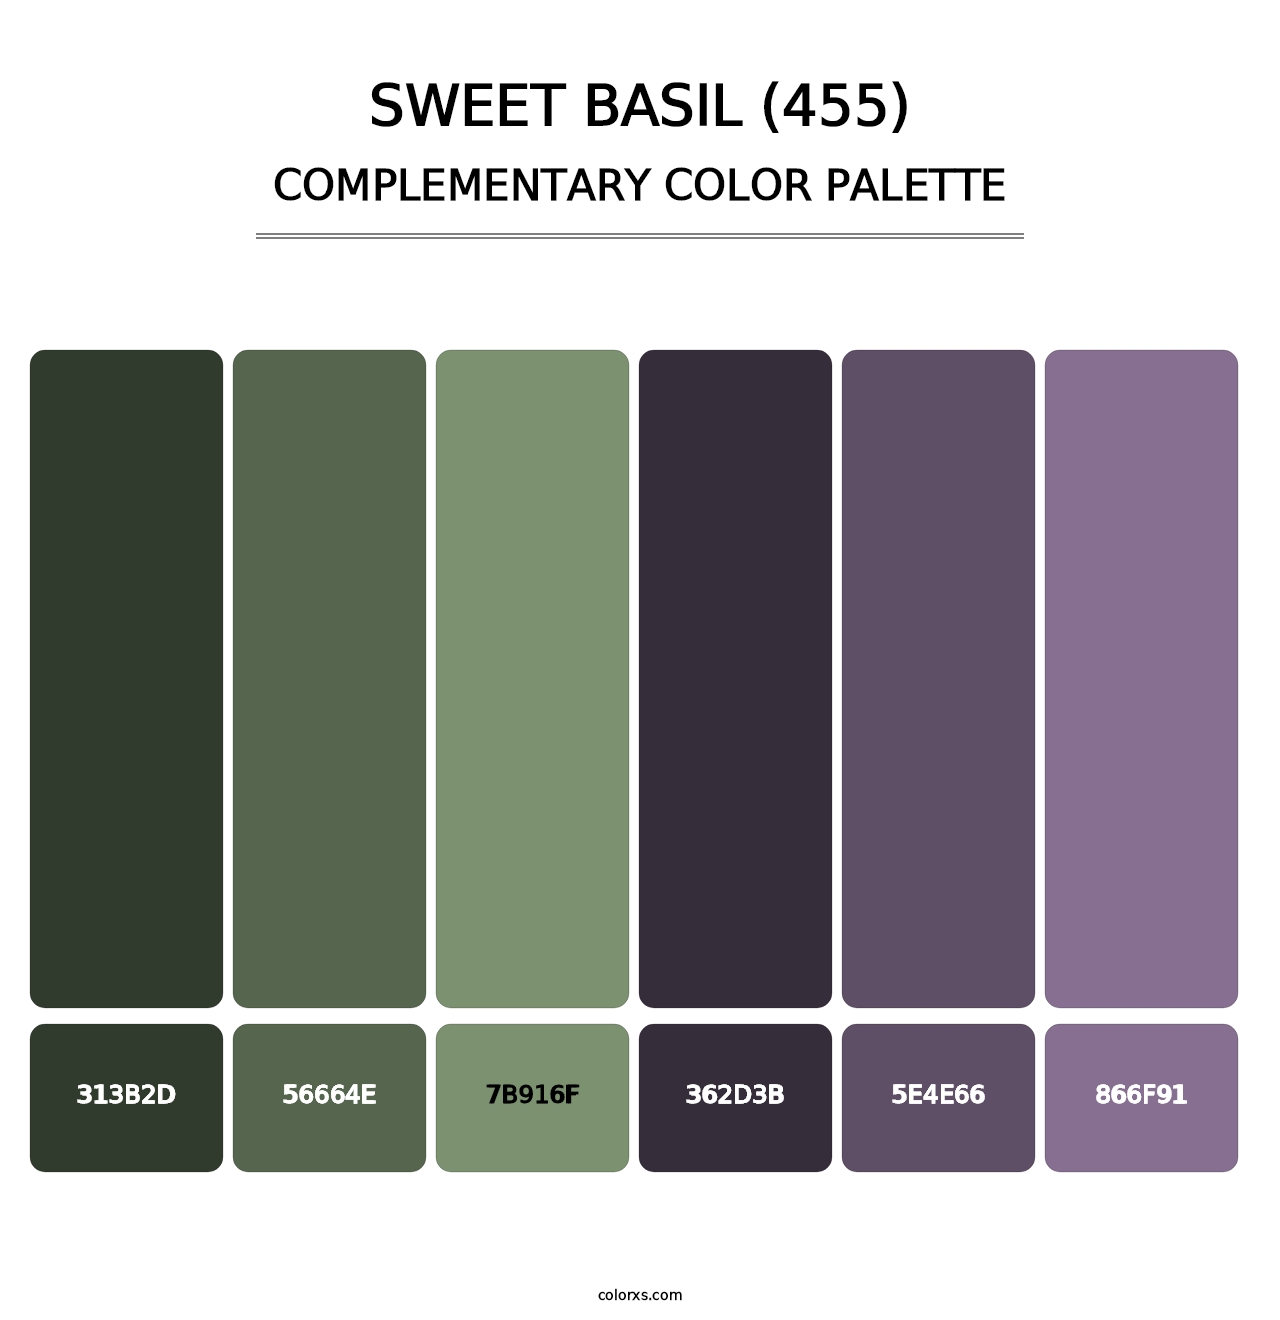 Sweet Basil (455) - Complementary Color Palette